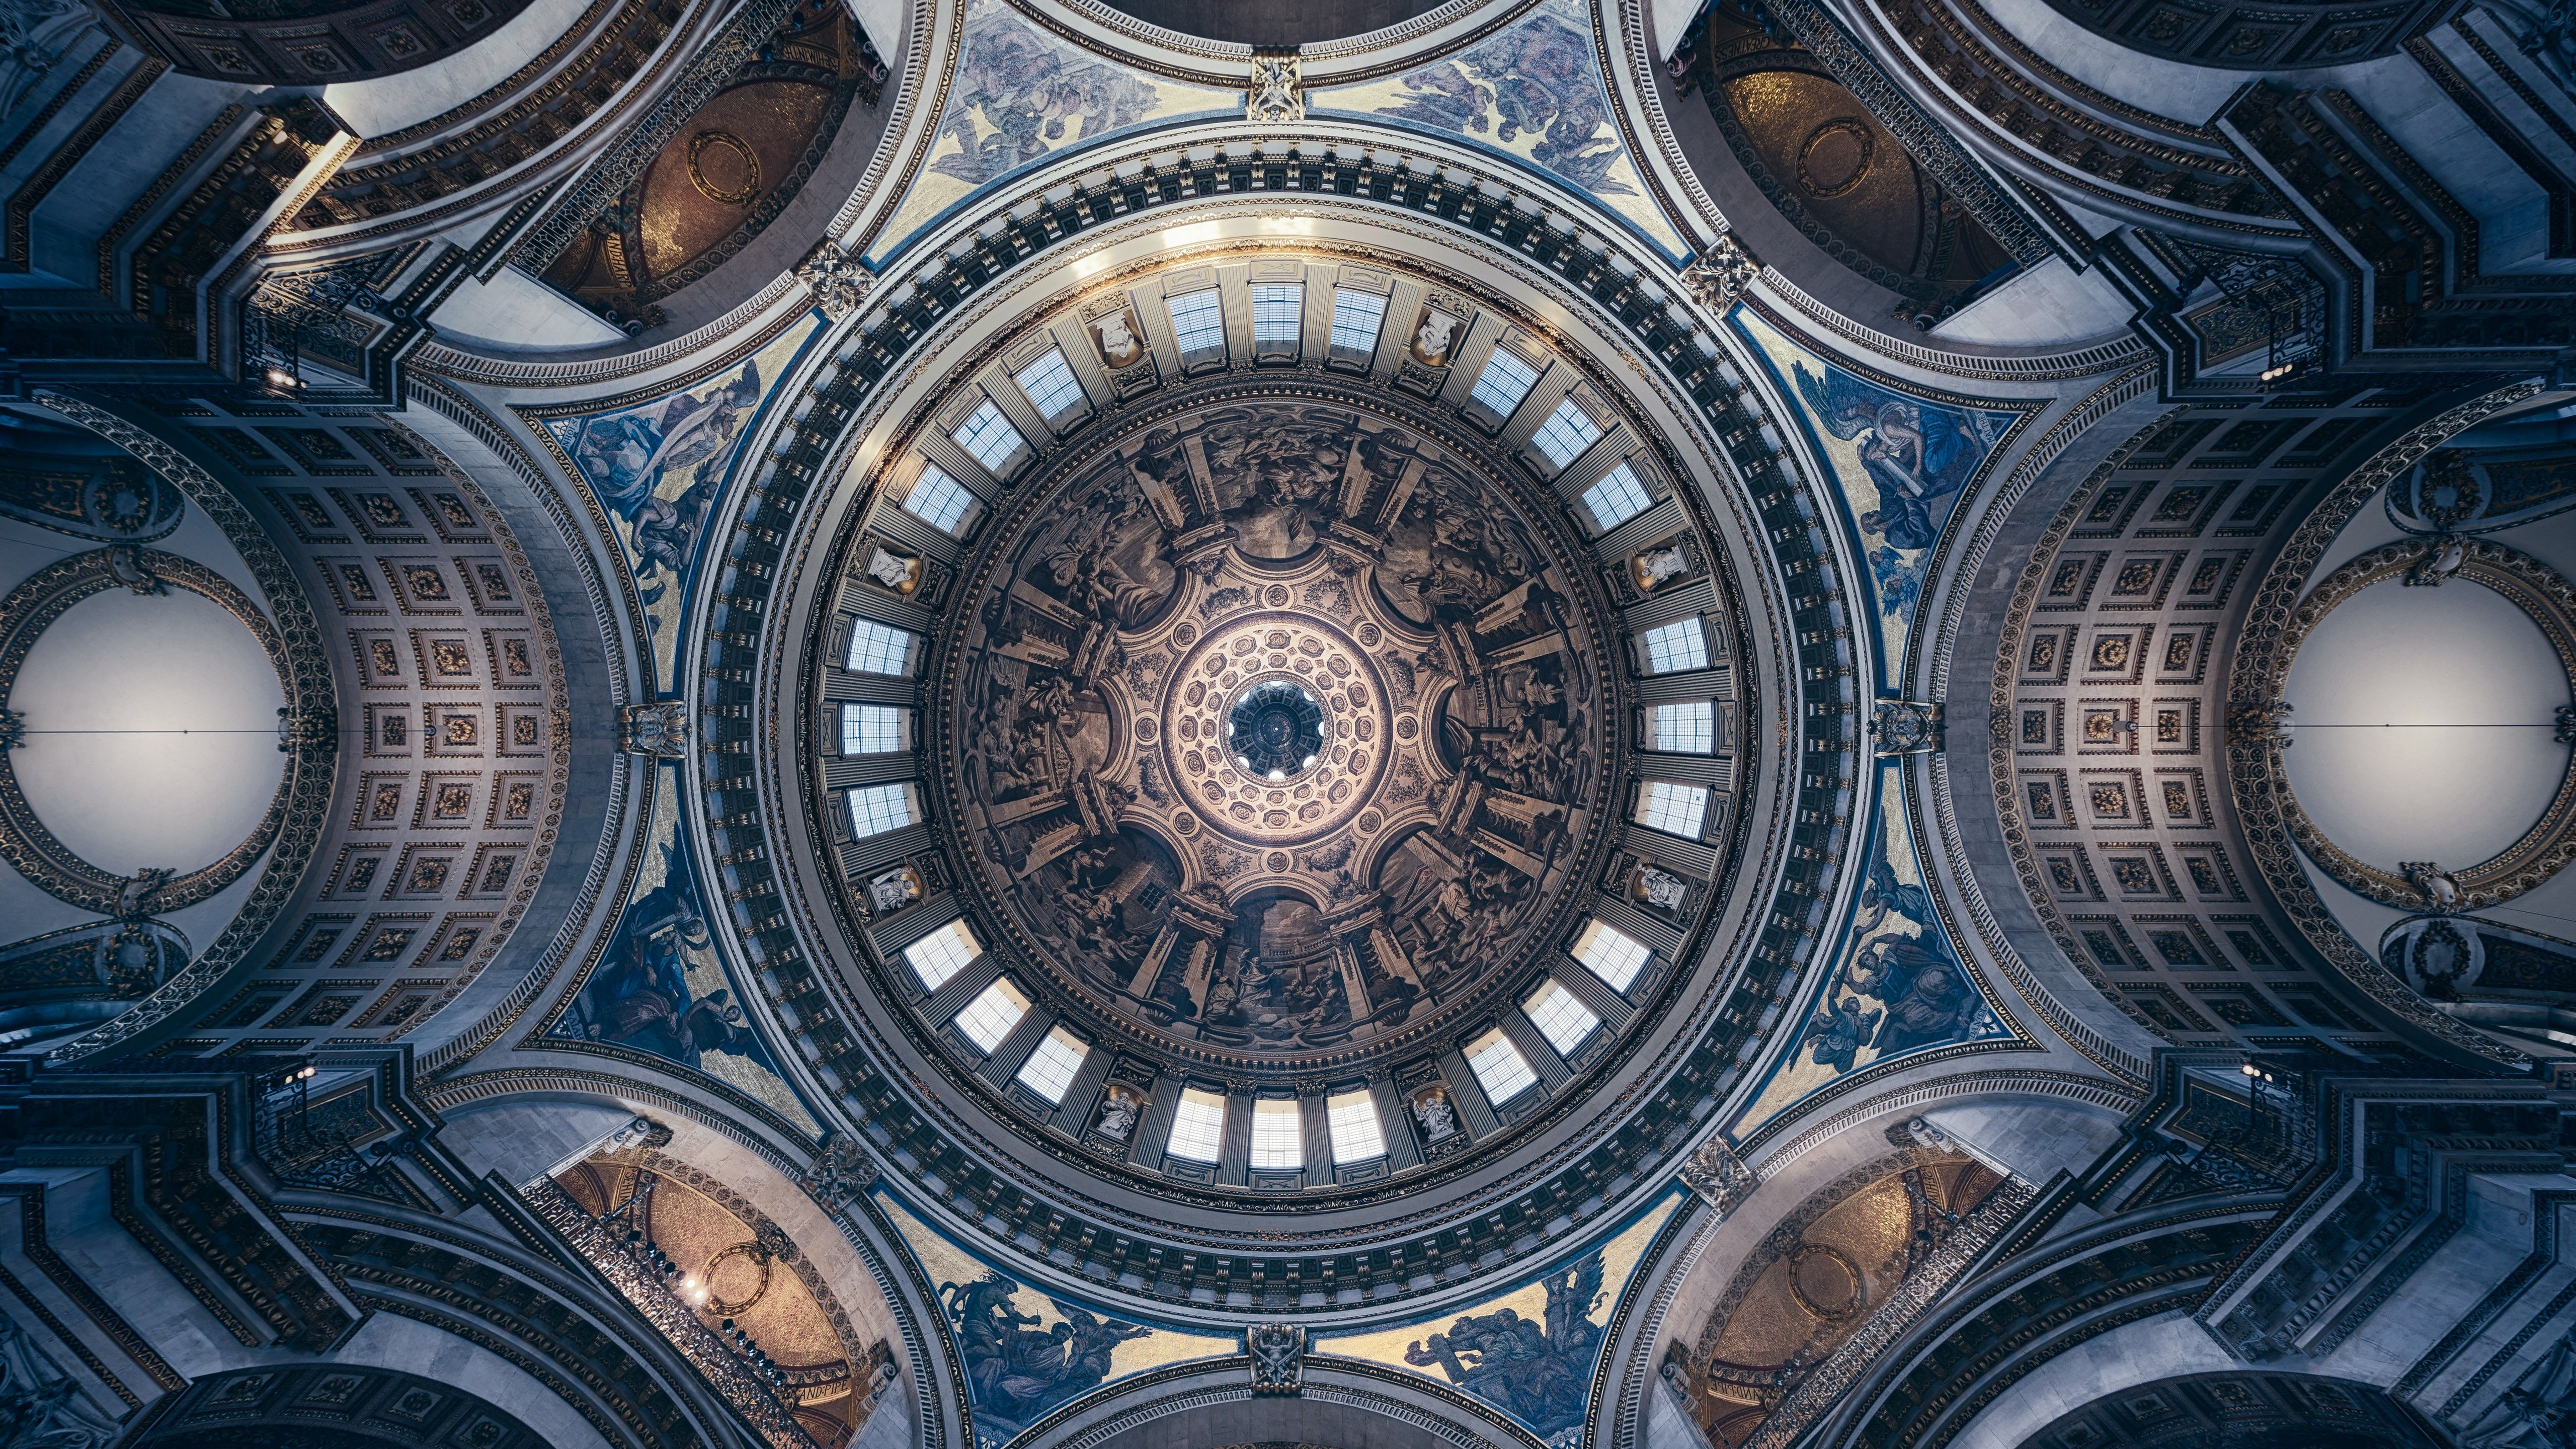 St Paul's Cathedral 4K Wallpaper, United Kingdom, London, Church, Dome, Ceiling, Look up, Symmetrical, World